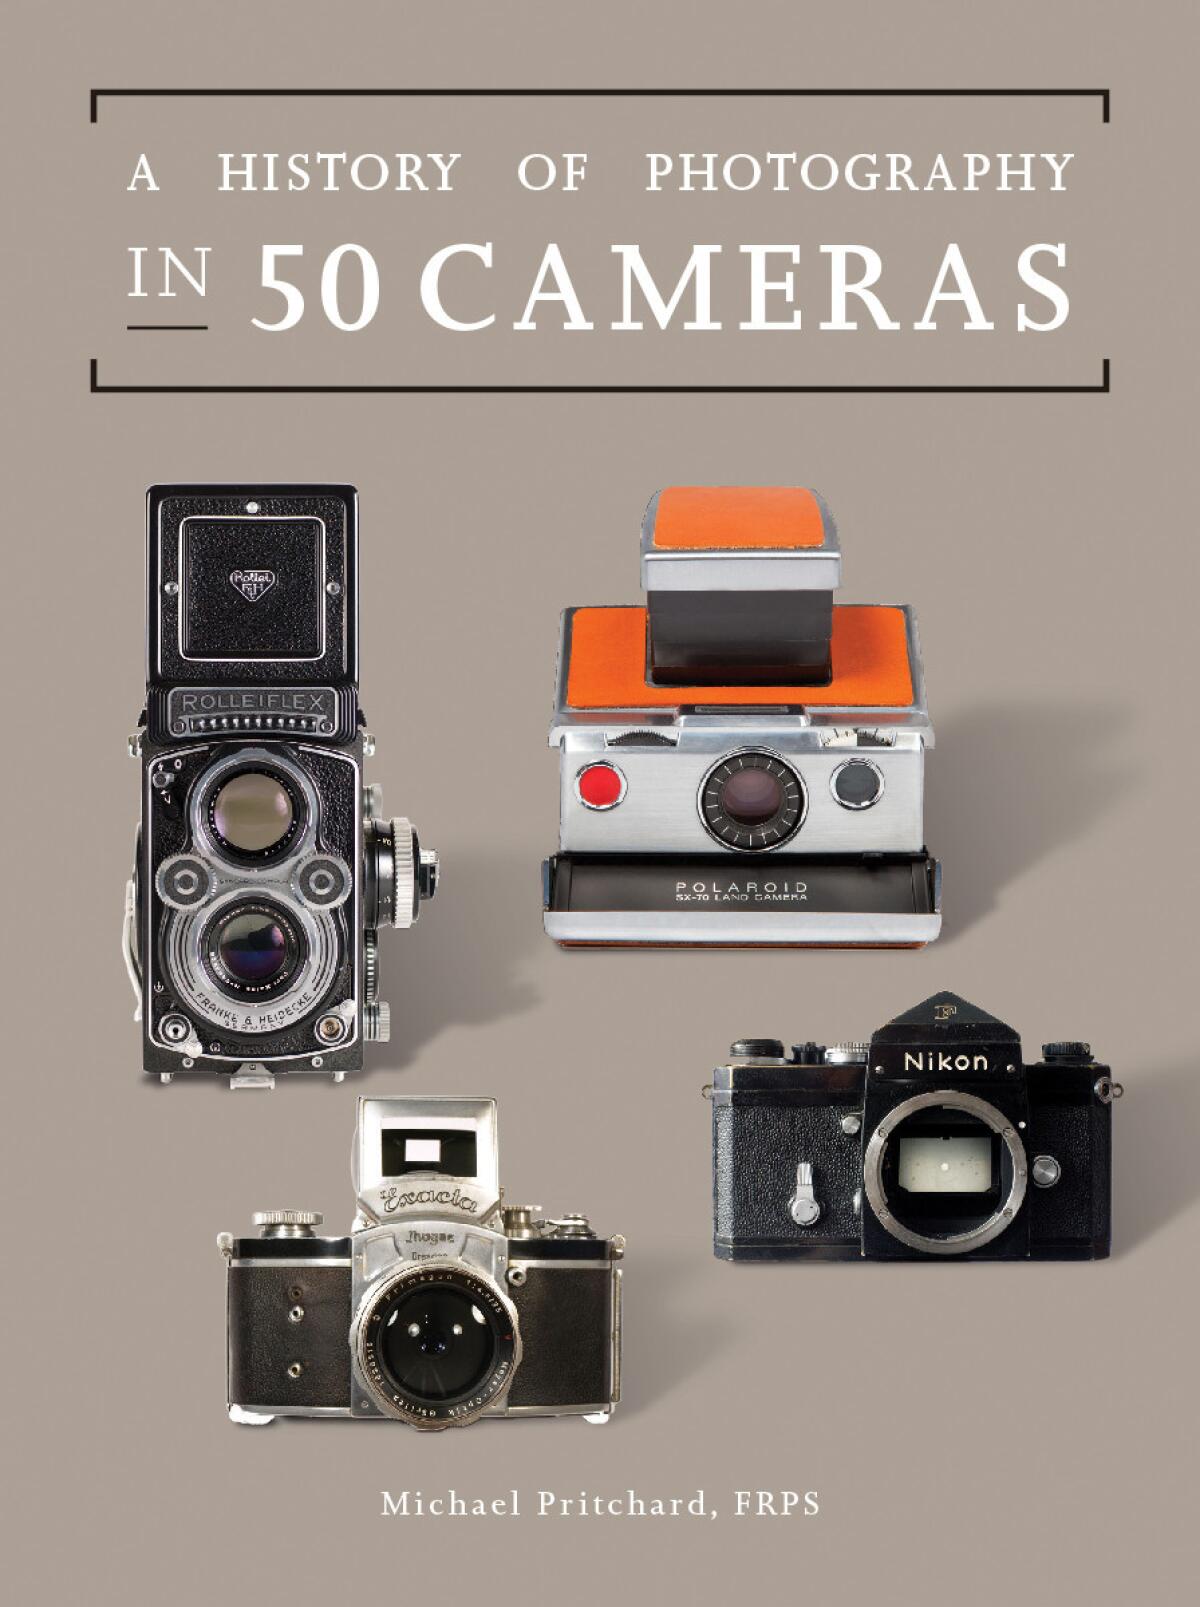 A History of Photography in 50 Cameras by Michael Pritchard